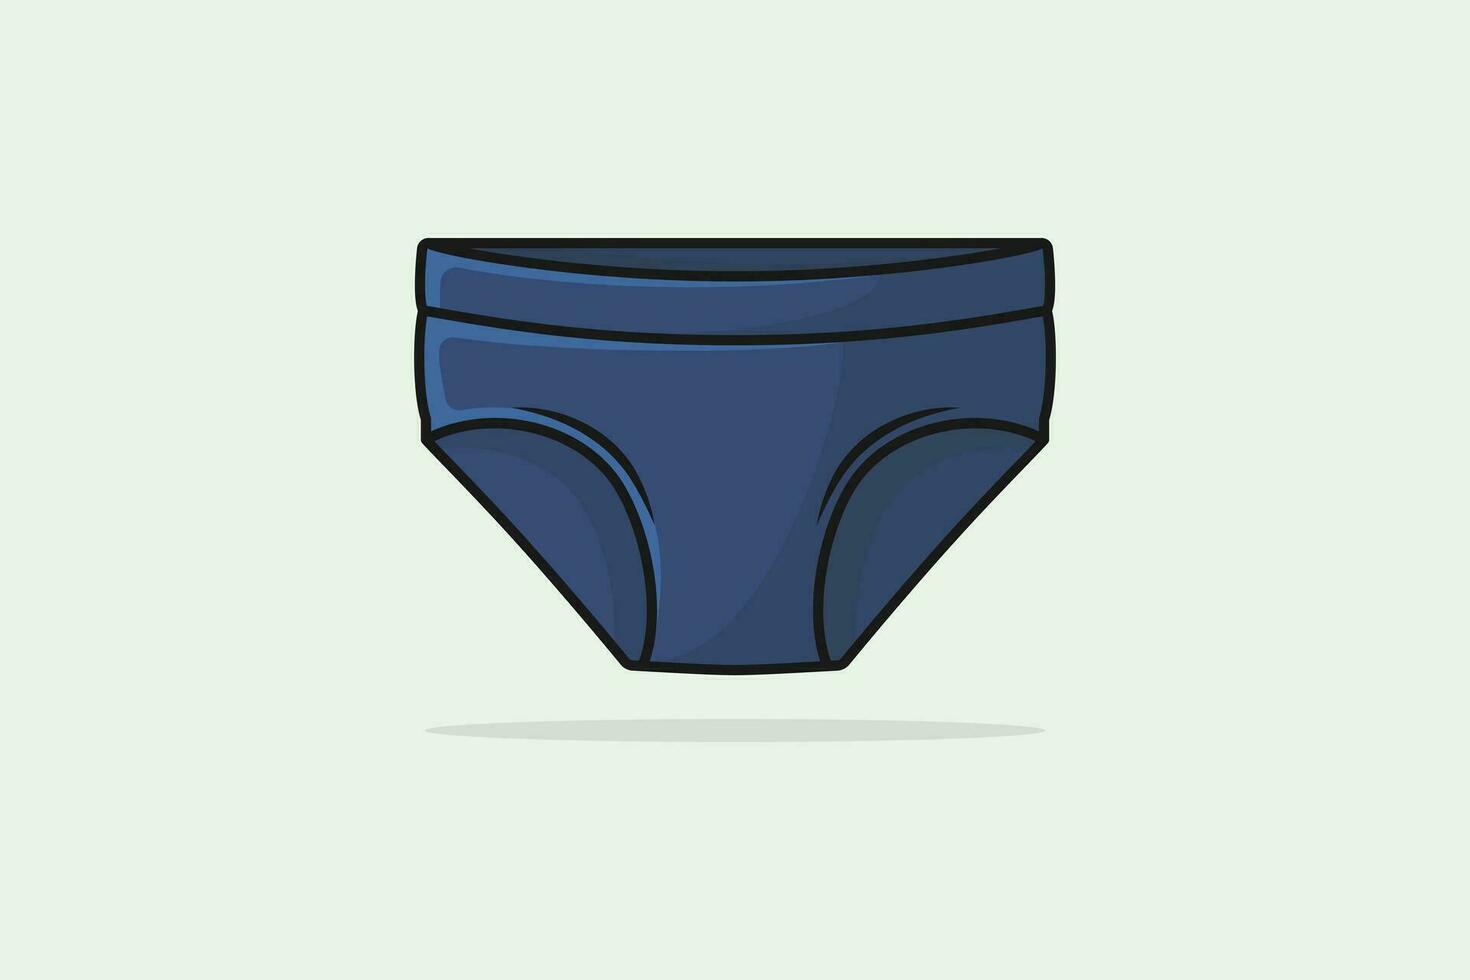 Men Underwear Boxer vector illustration. Sports and fashion objects icon concept.